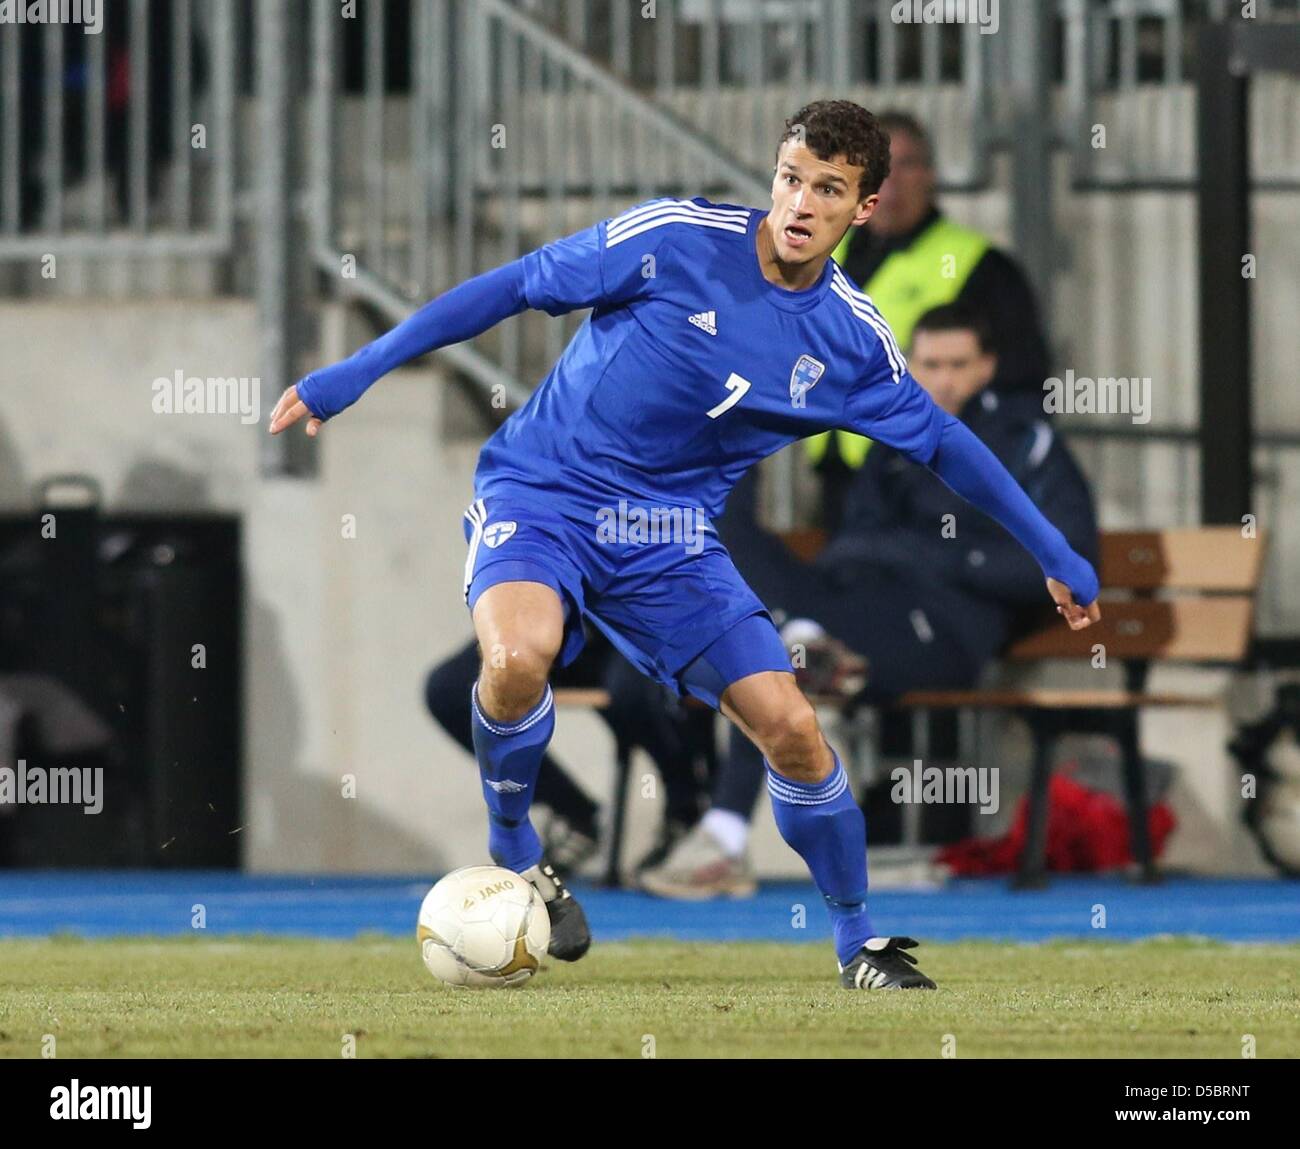 Finland's player Roman Eremenko during the football friendly match  Luxembourg vs Finland in Luxembourg on 26th March, 2013. STR / LEHTIKUVA /  Ville Vuorinen *** FINLAND OUT. NO THIRD PARTY SALES. *** Stock Photo -  Alamy